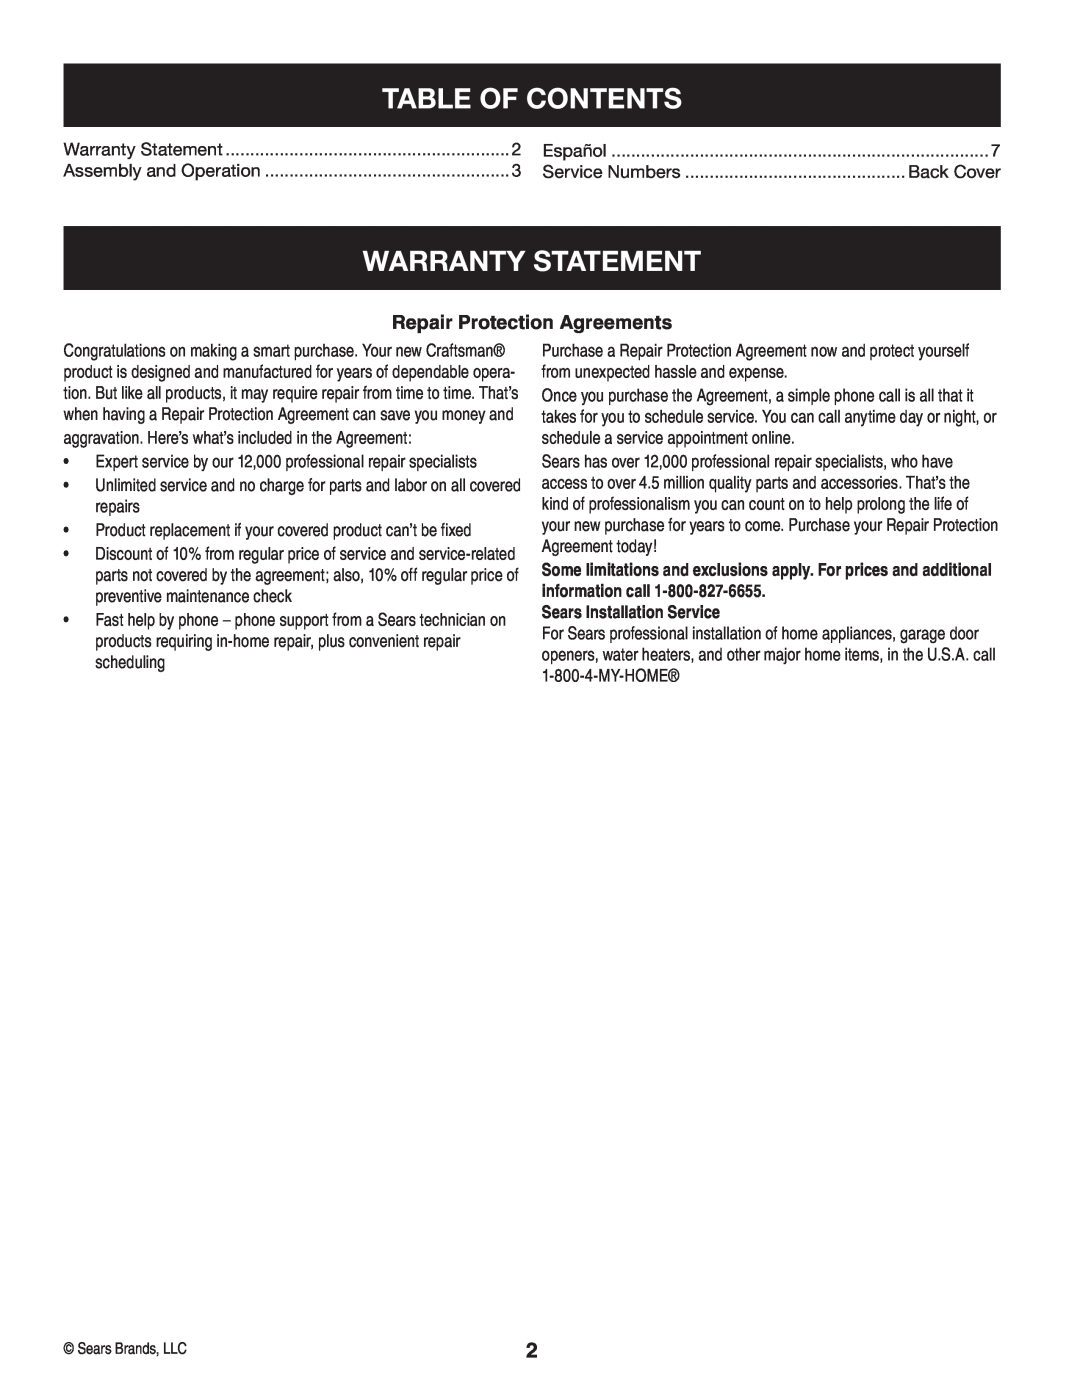 Sears 33731 manual Table Of Contents, Warranty Statement, Repair Protection Agreements, Sears Installation Service 